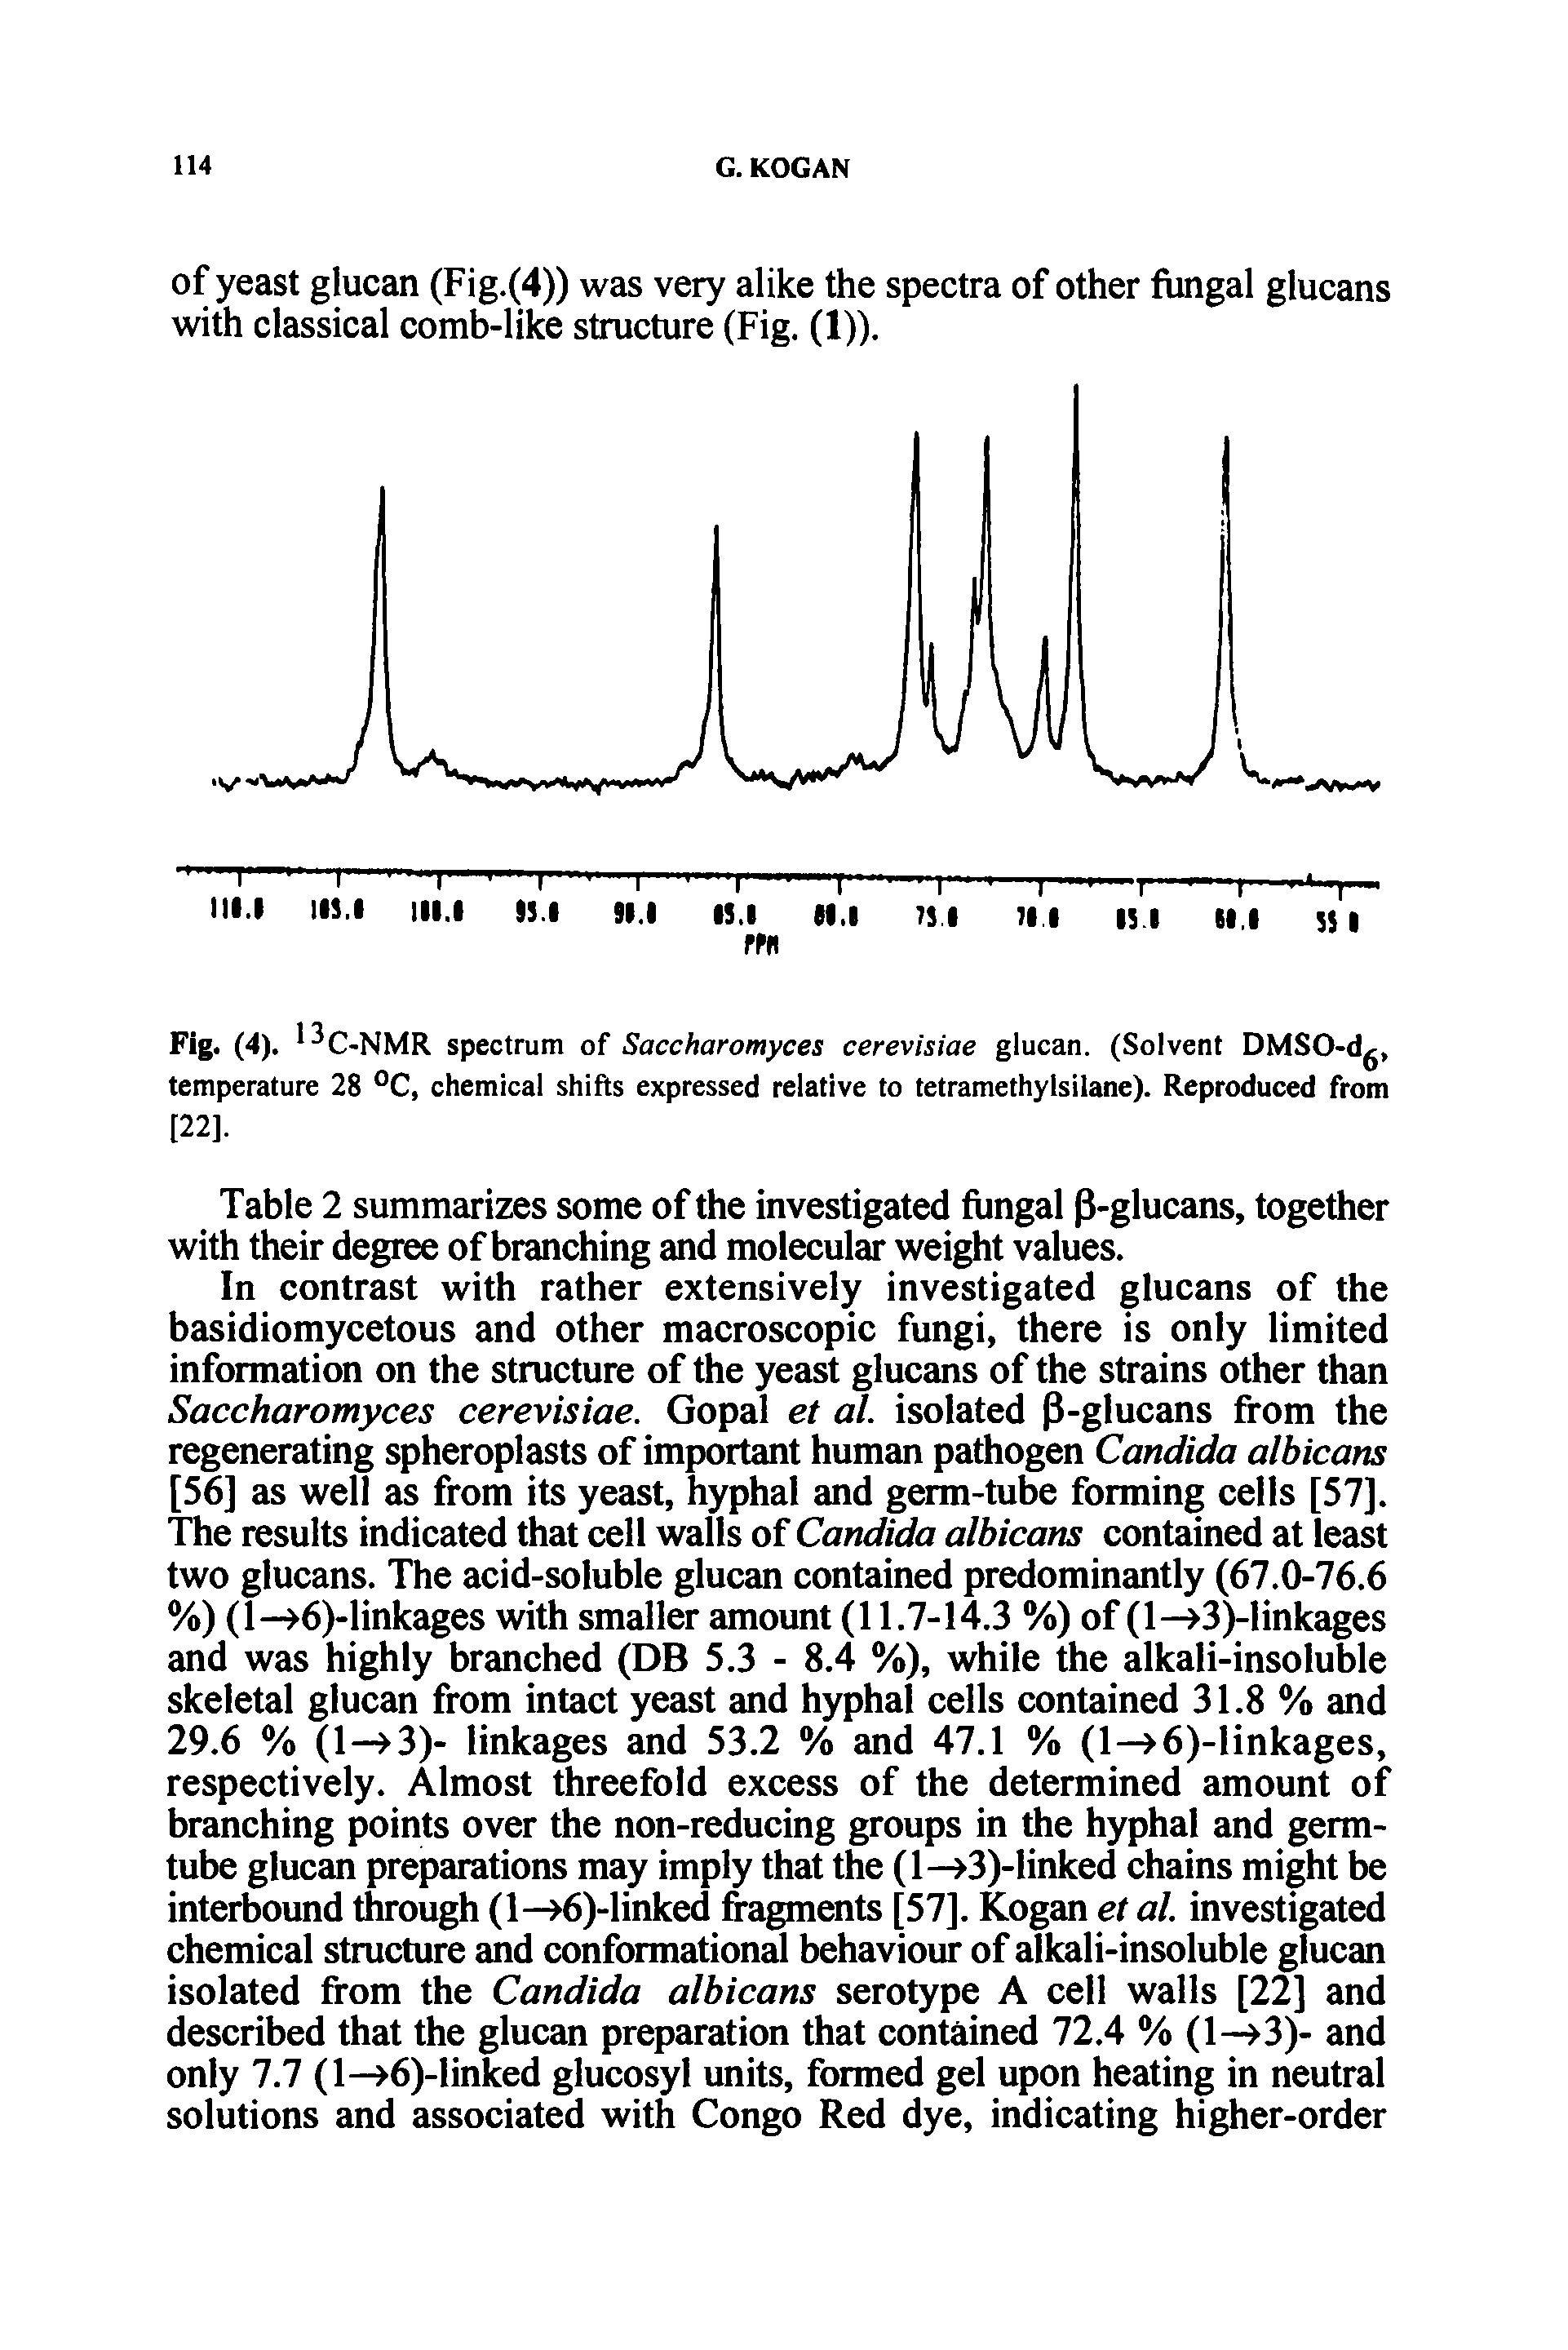 Fig. (4). C-NMR spectrum of Saccharomyces cerevisiae glucan. (Solvent DMSO-dg, temperature 28 °C, chemical shifts expressed relative to tetramethylsilane). Reproduced from [22].